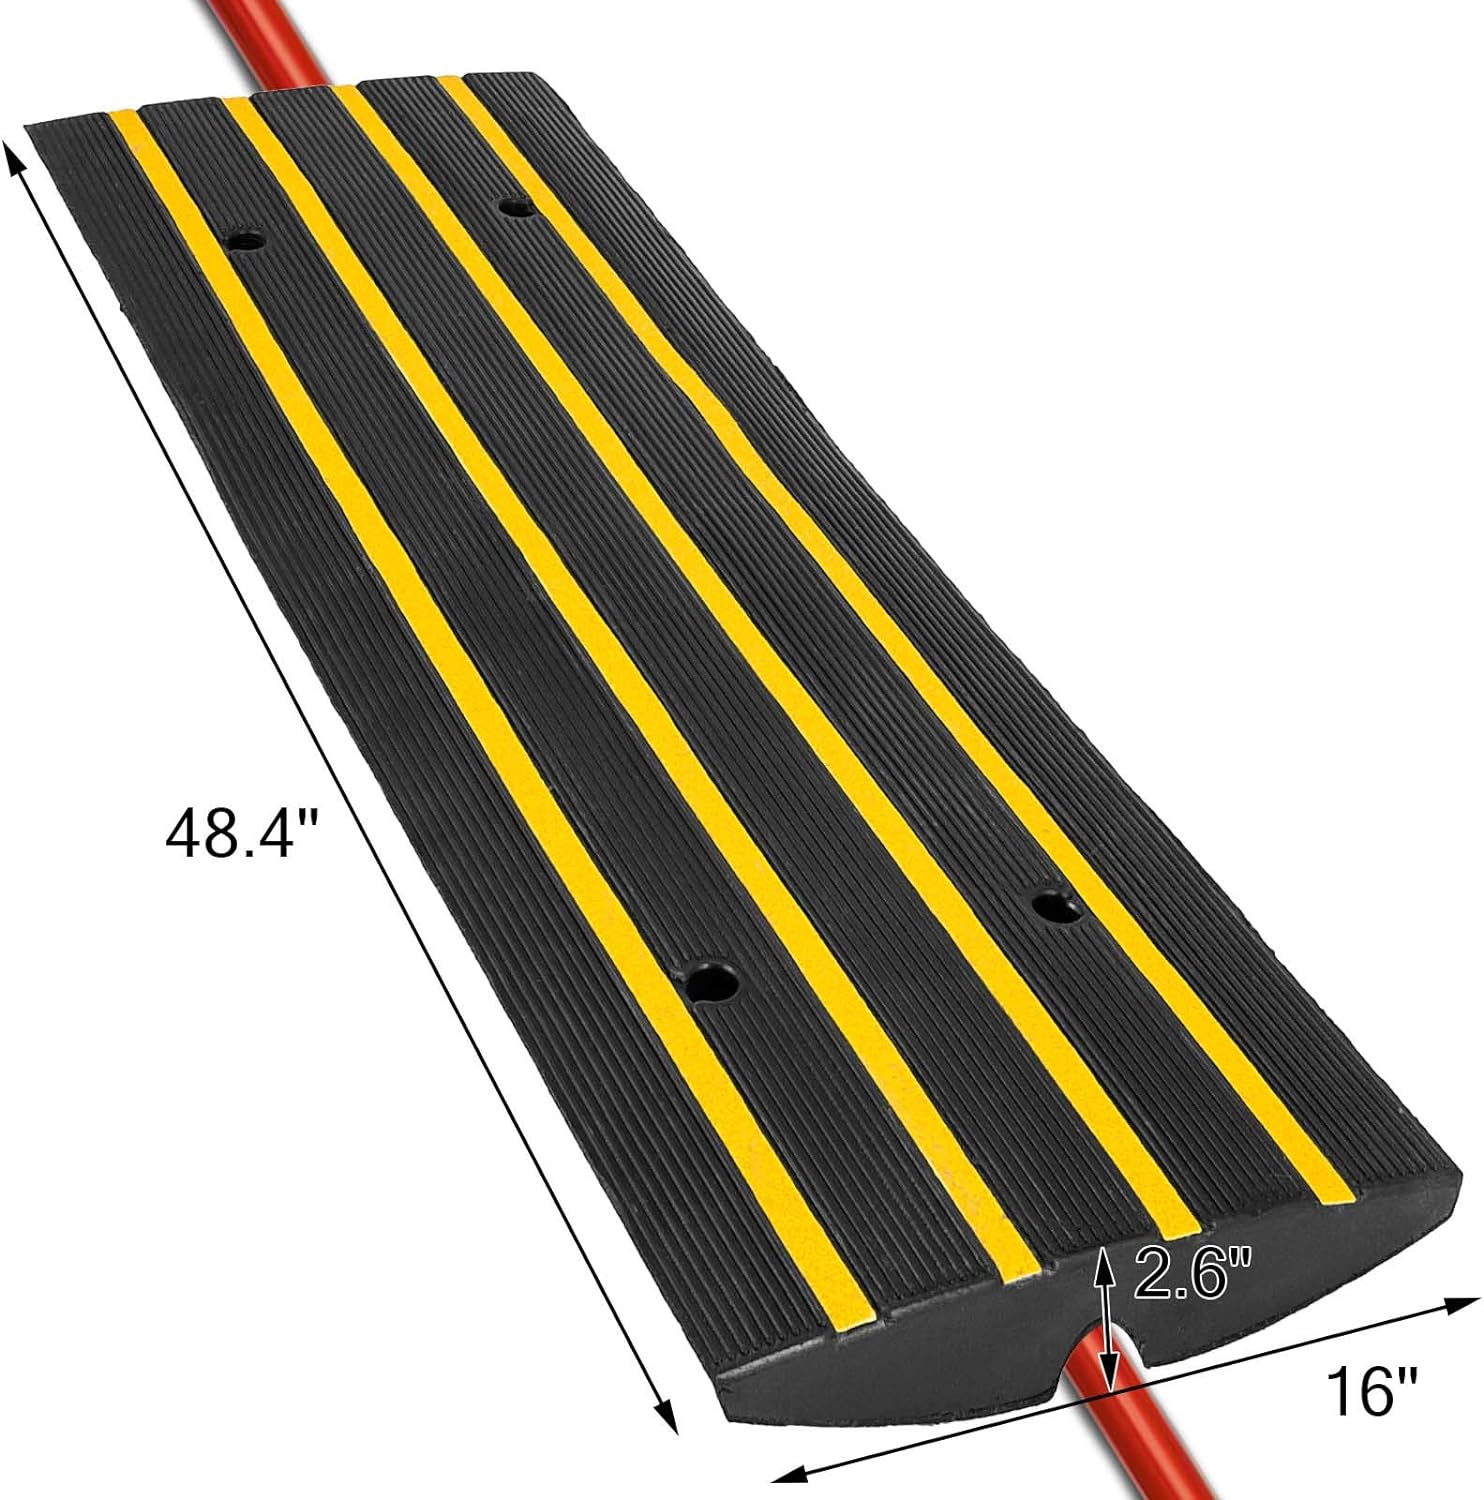 Happybuy iSH09-M772506mn Car Driveway Rubber Curb Ramps Heavy Duty 22000lbs  Capacity Threshold Ramp 2.5 Inch High Cable Cover Curbside Bridge Ramp for L